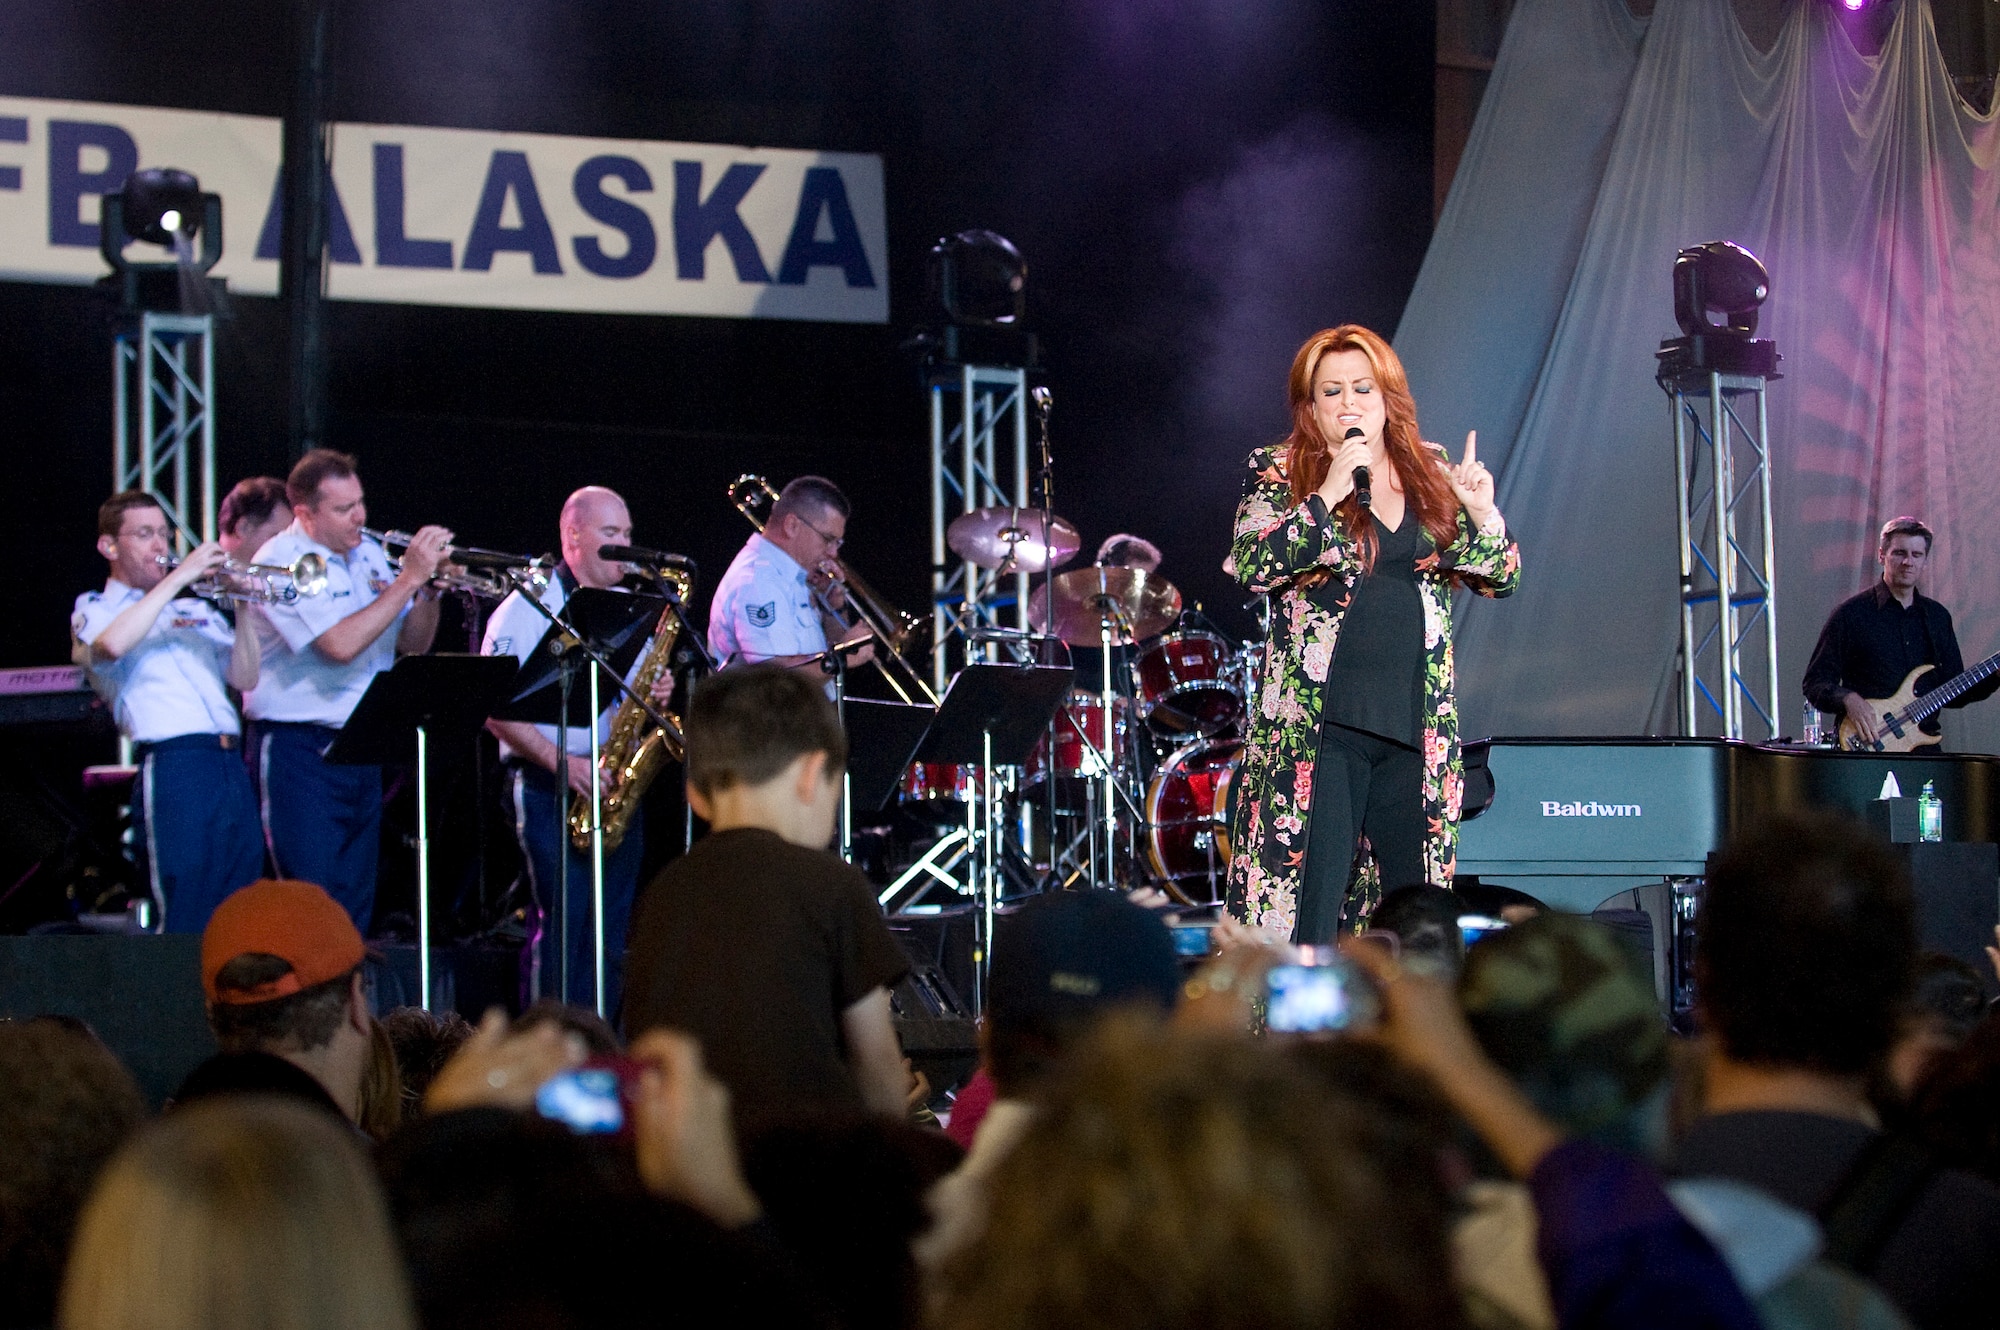 ELMENDORF AIR FORCE BASE, Alaska -- Wynonna Judd performs with the U.S. Air Force Band of the Pacific to the military and Alaska crowd at the "Alaska's Concert for the Military" June 27 at Hangar 2. The concert was a part of Alaska's 50 years statehood celebration. (U.S. Air Force photo by Senior Airman Jonathan Steffen)